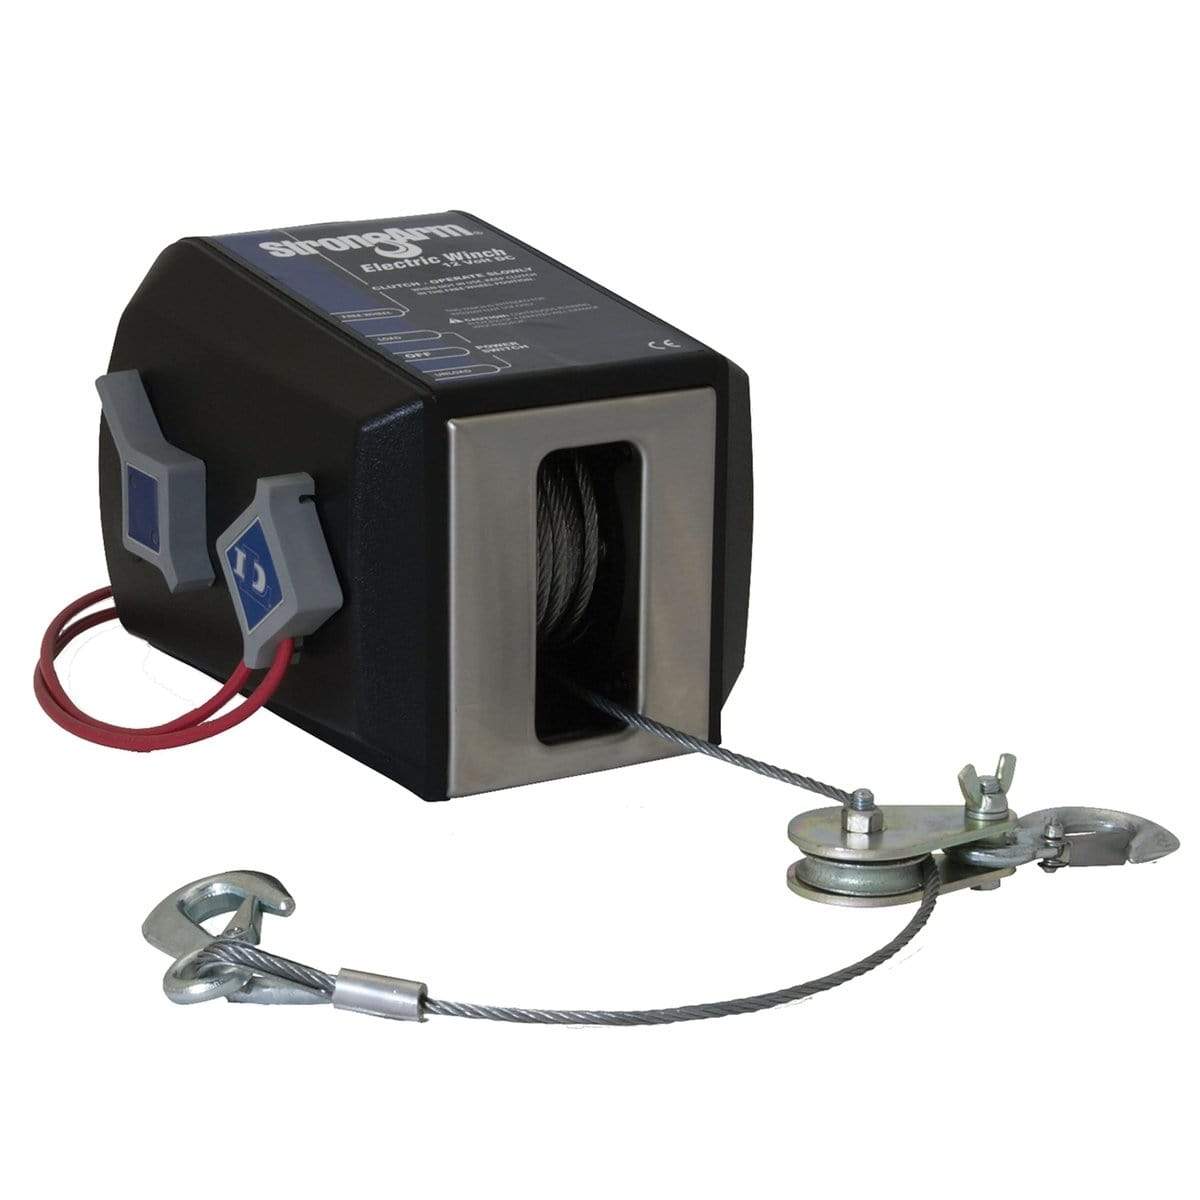 Dutton-Lainson Not Qualified for Free Shipping Dutton-Lainson Strongarm SA-Series 12v Winch SA12000DC 4500 lb #24874